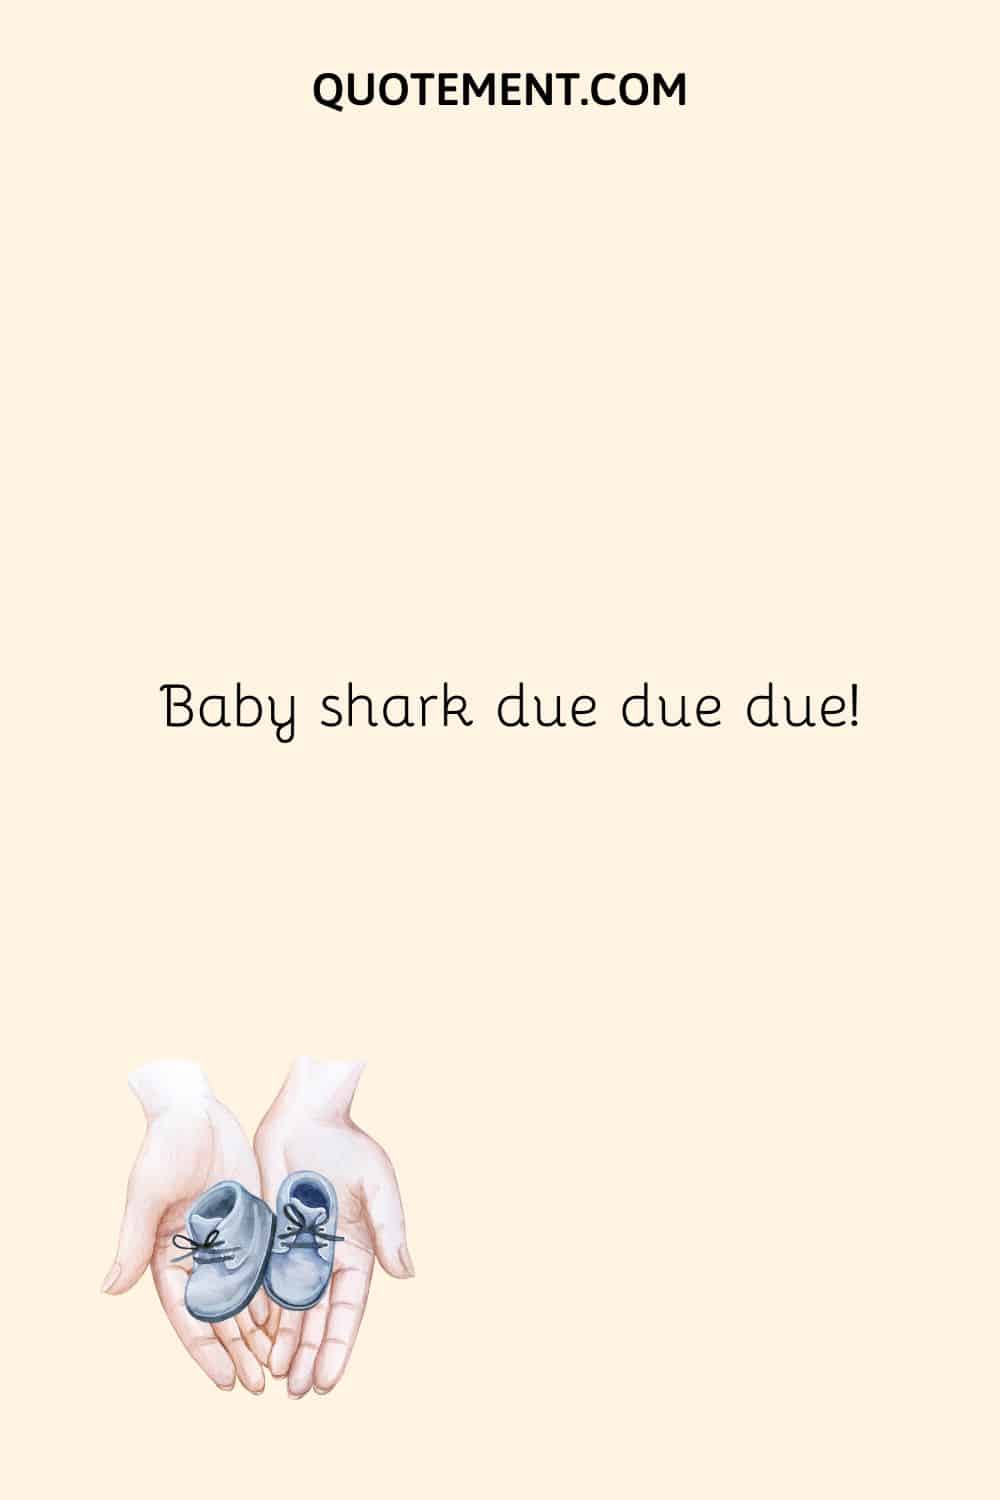 Baby shark due due due